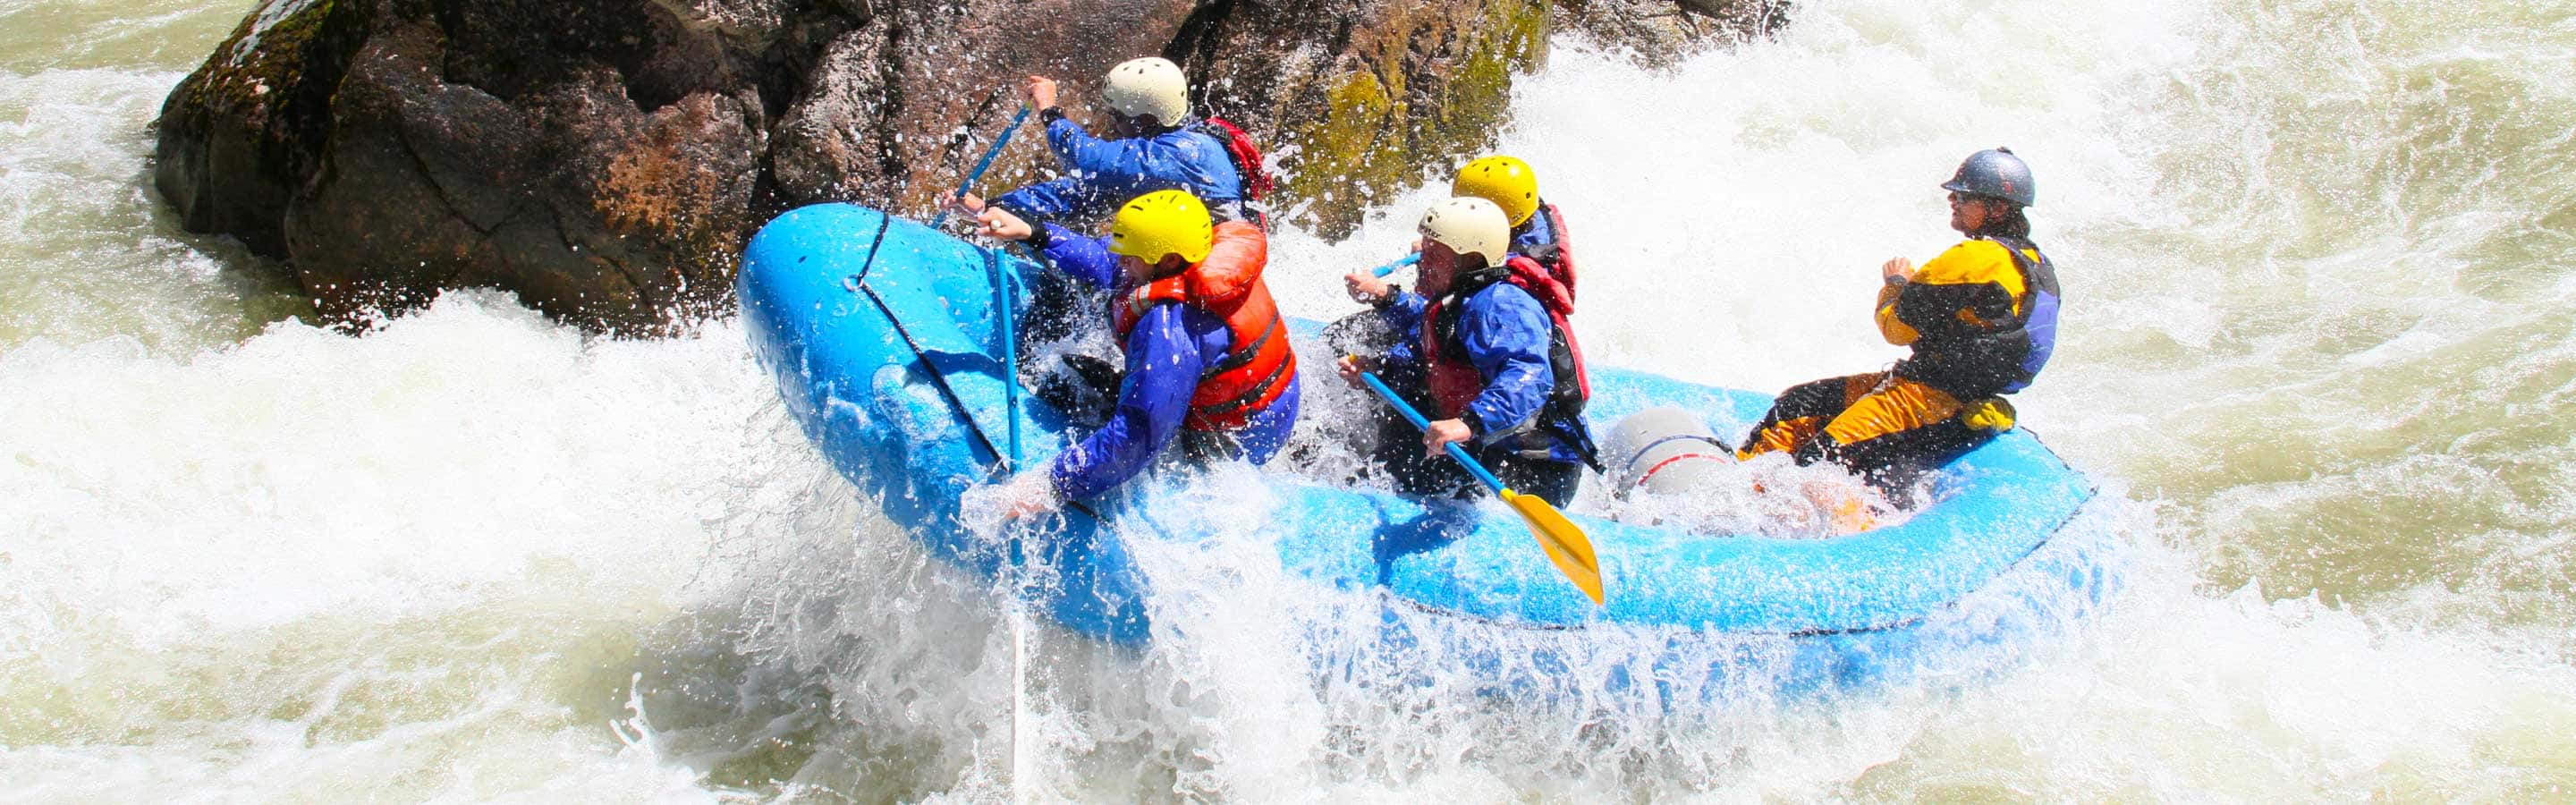 What Clothes Do You Wear White Water Rafting? – Berry Jane™